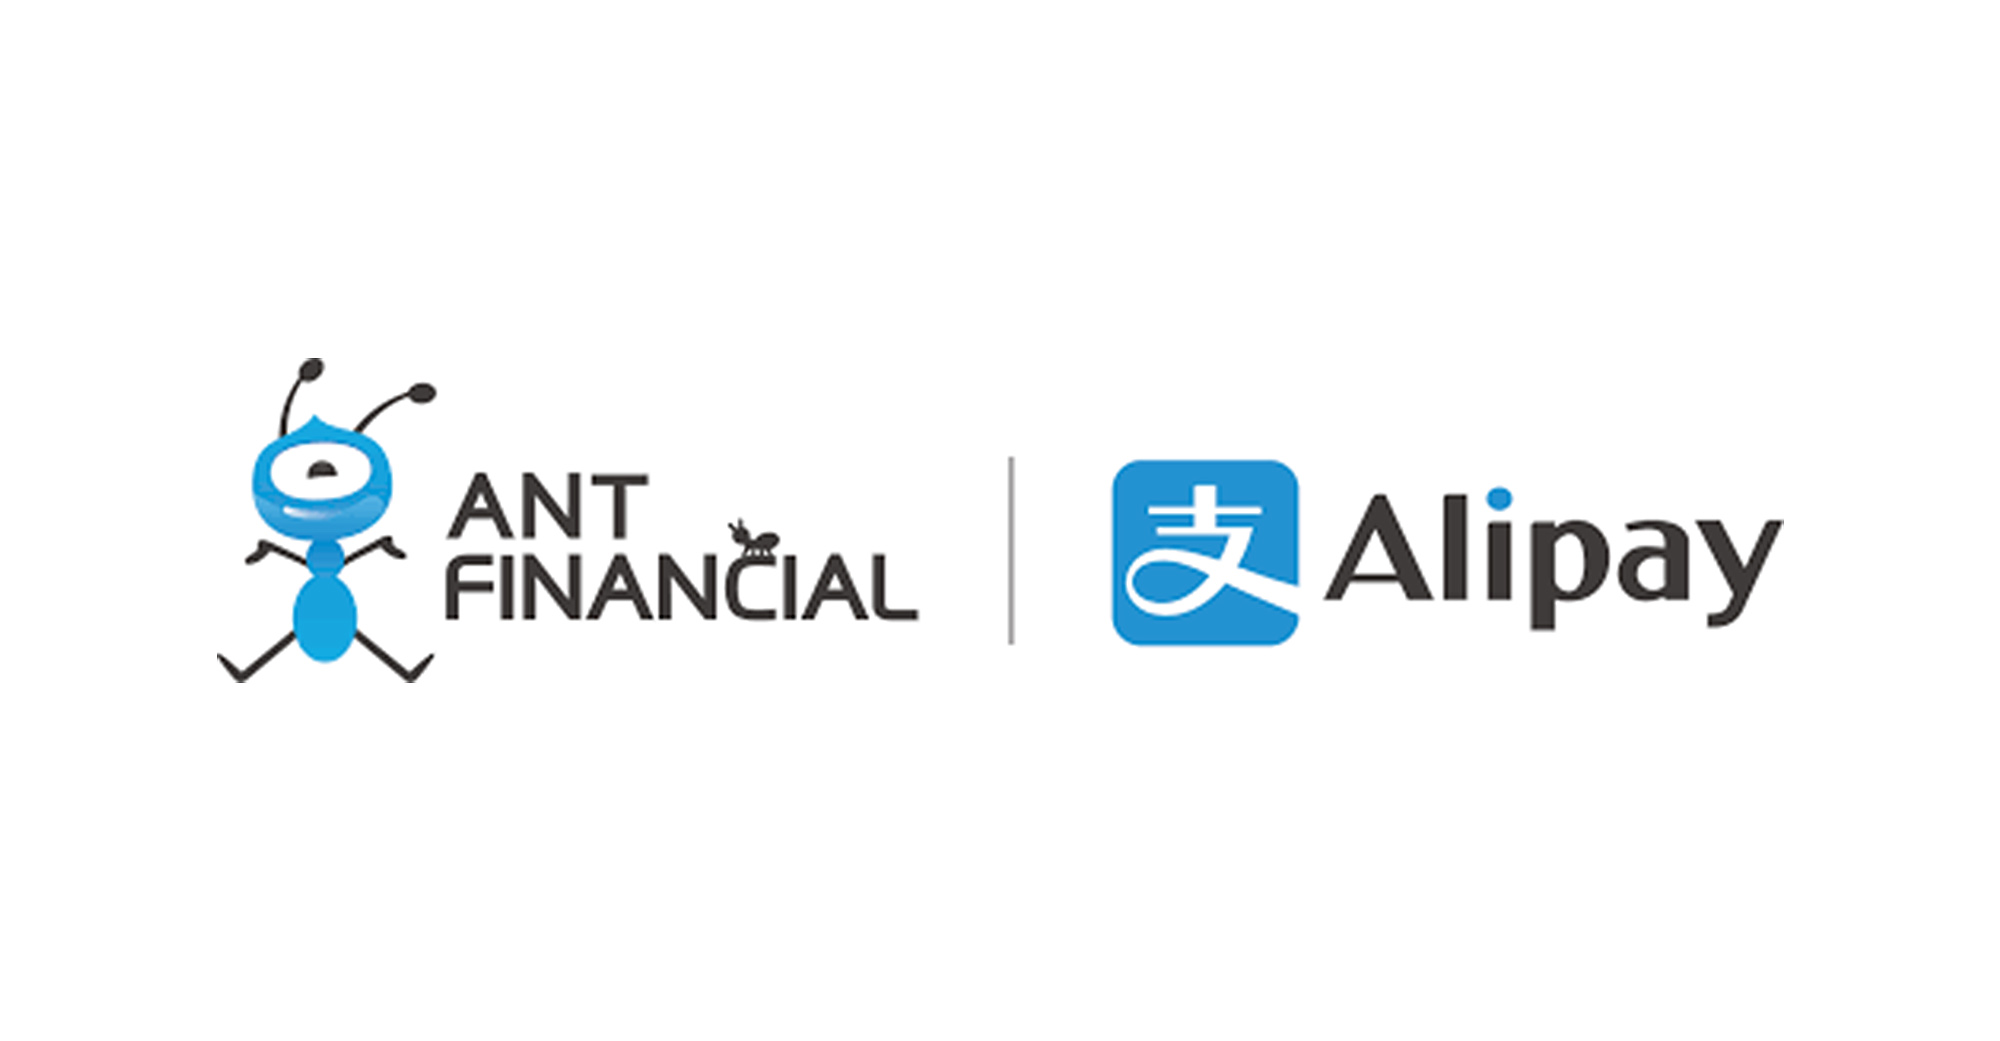 3 Case Study of Ant Financial A Giant in Chinese FinTech